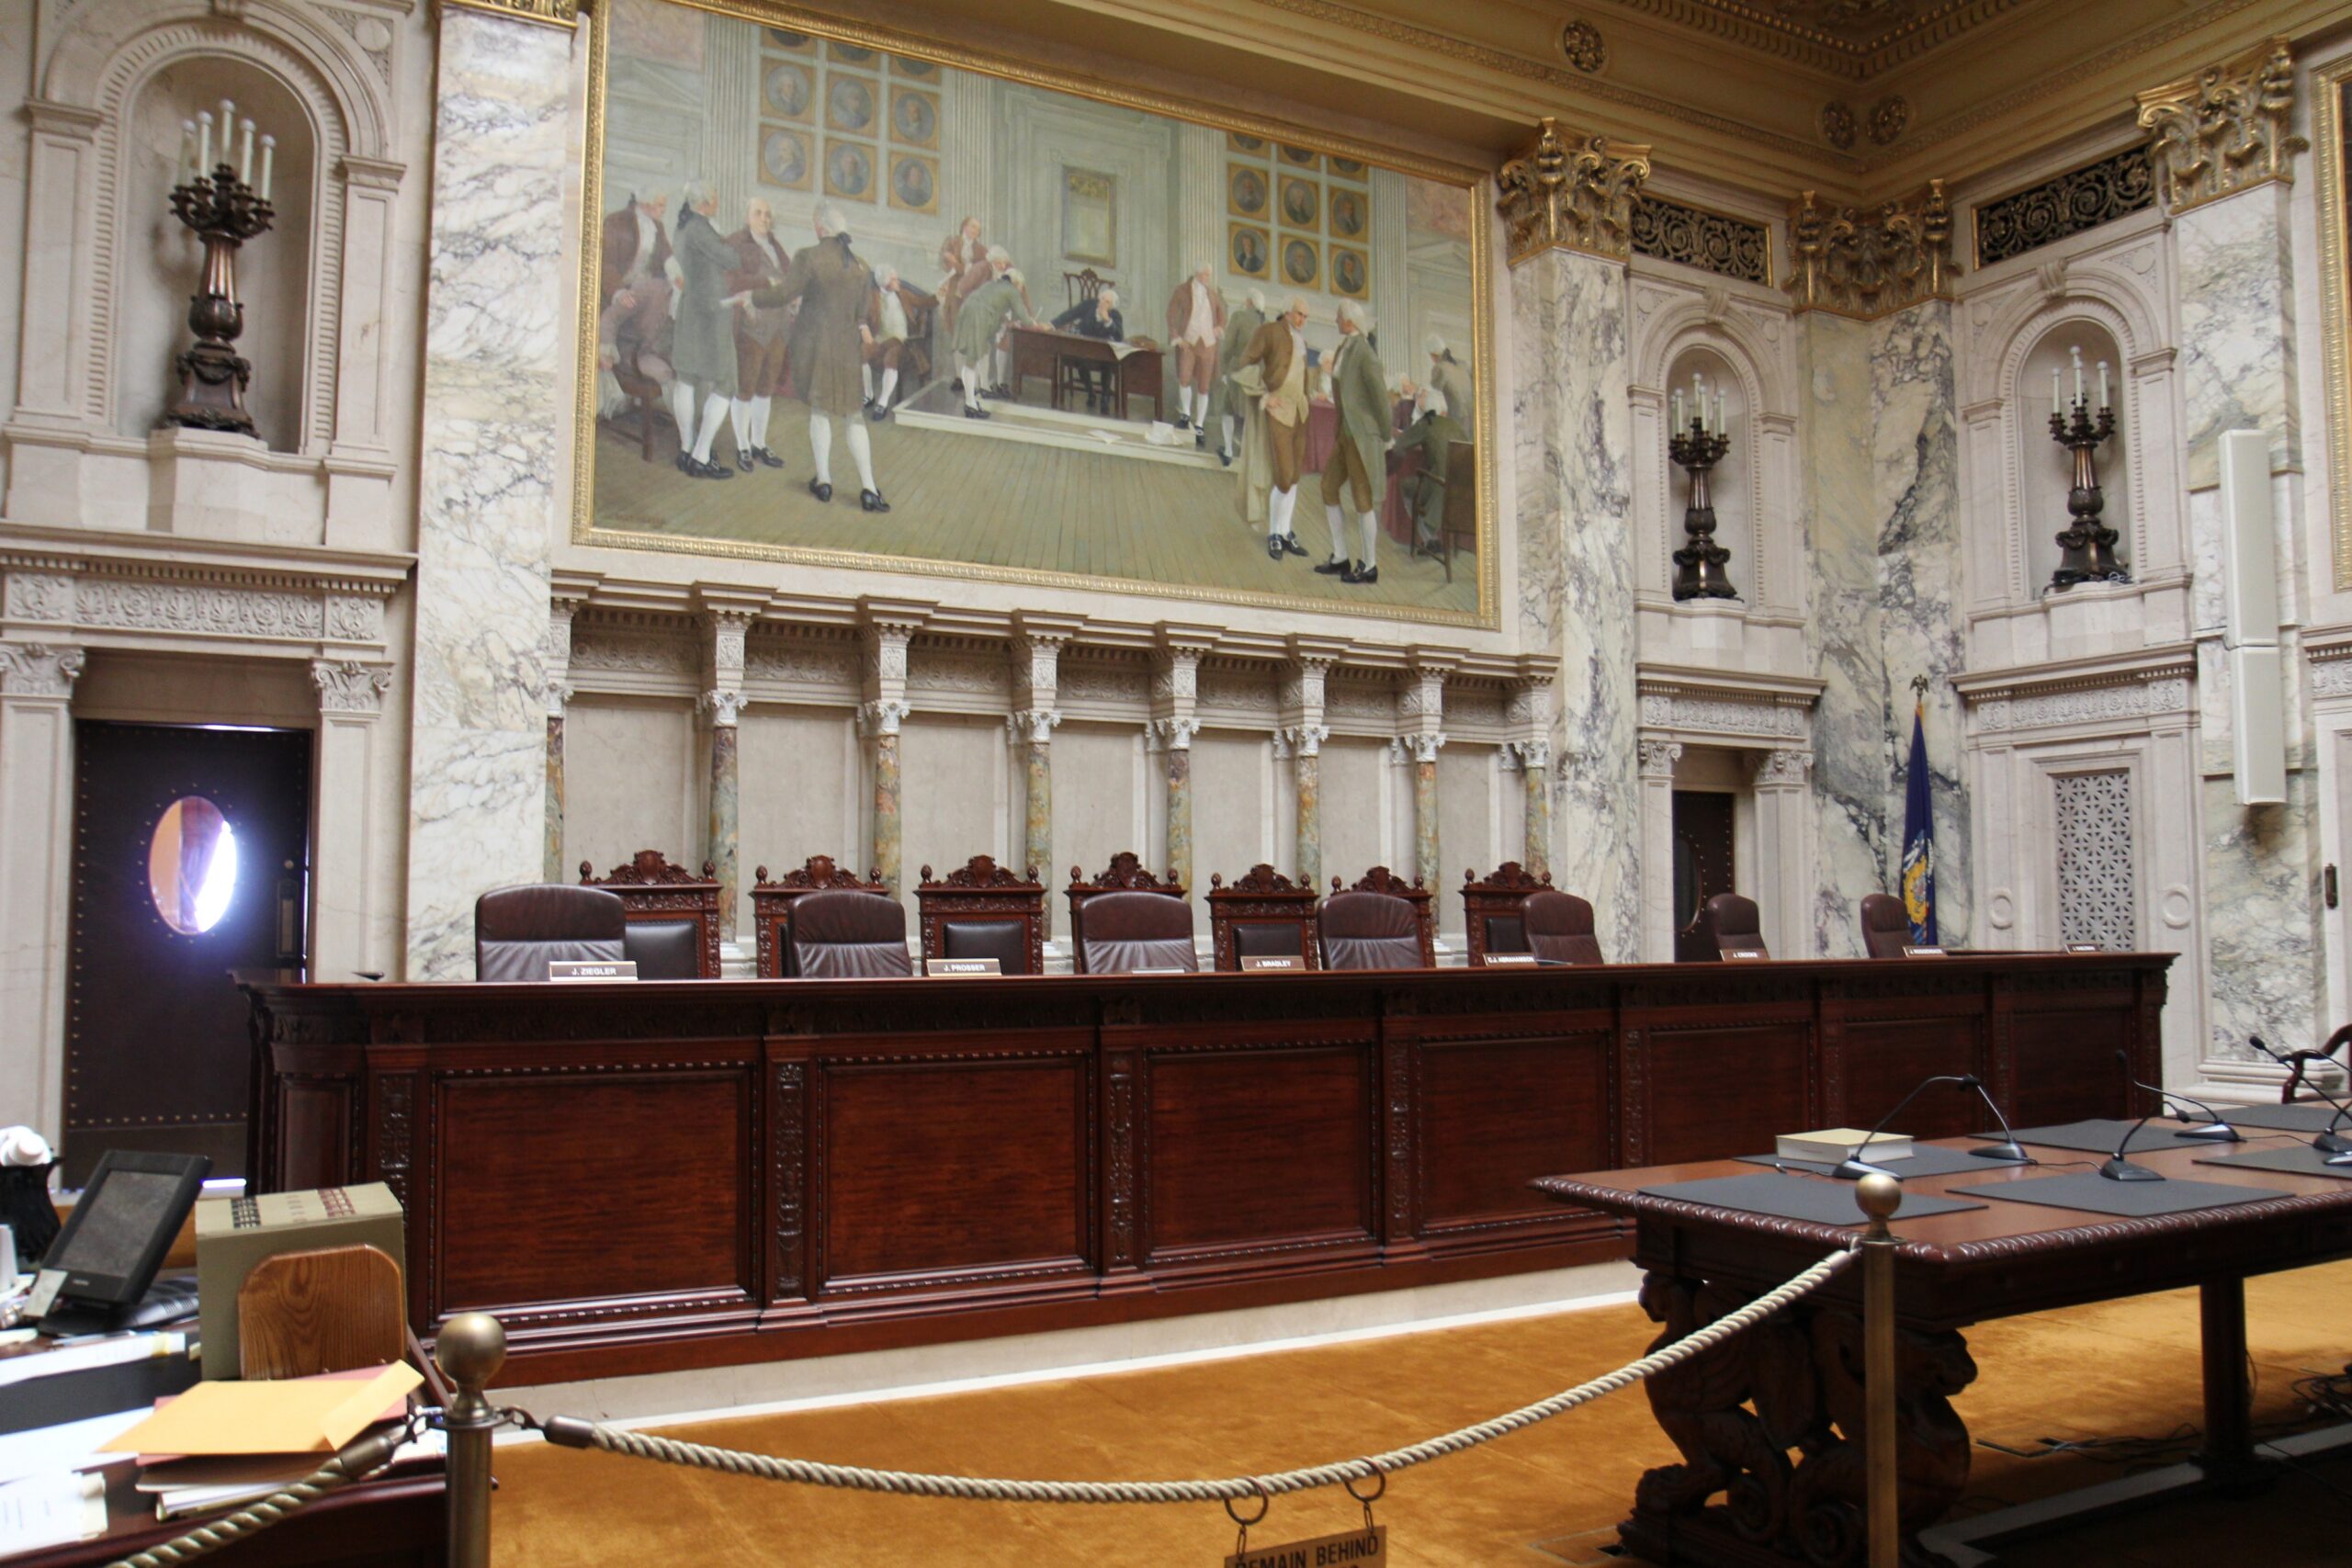 The Wisconsin Supreme Court chamber